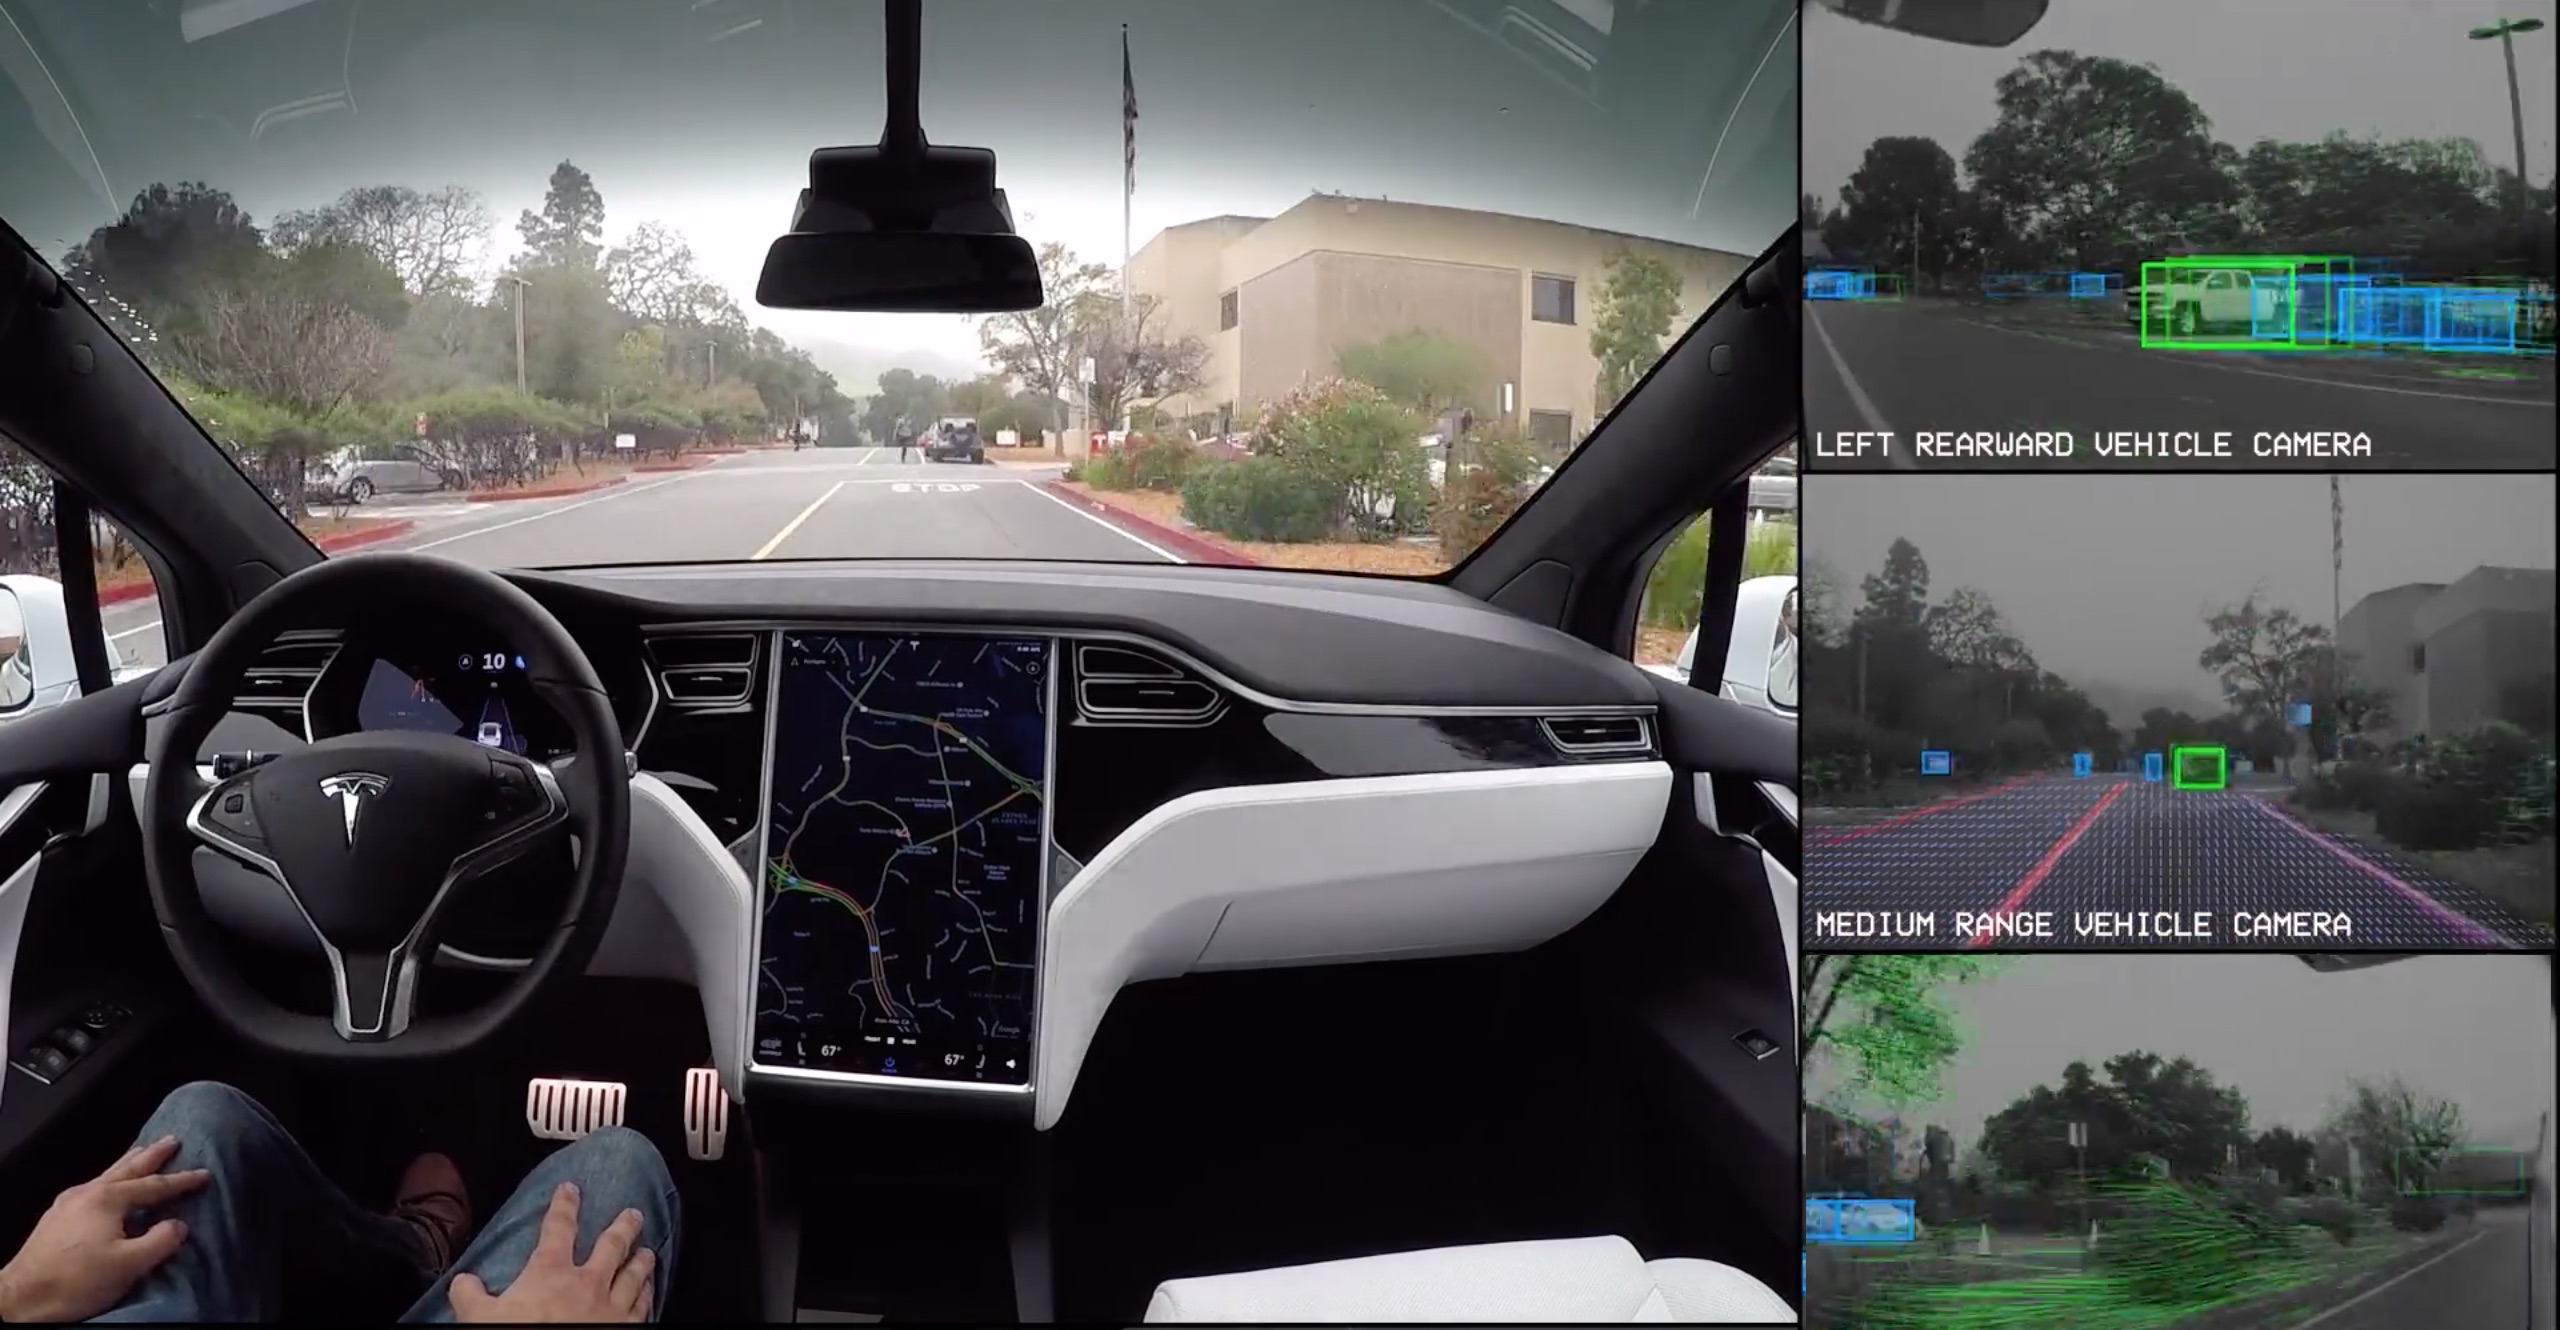 driverless cars-safety and security- tesla